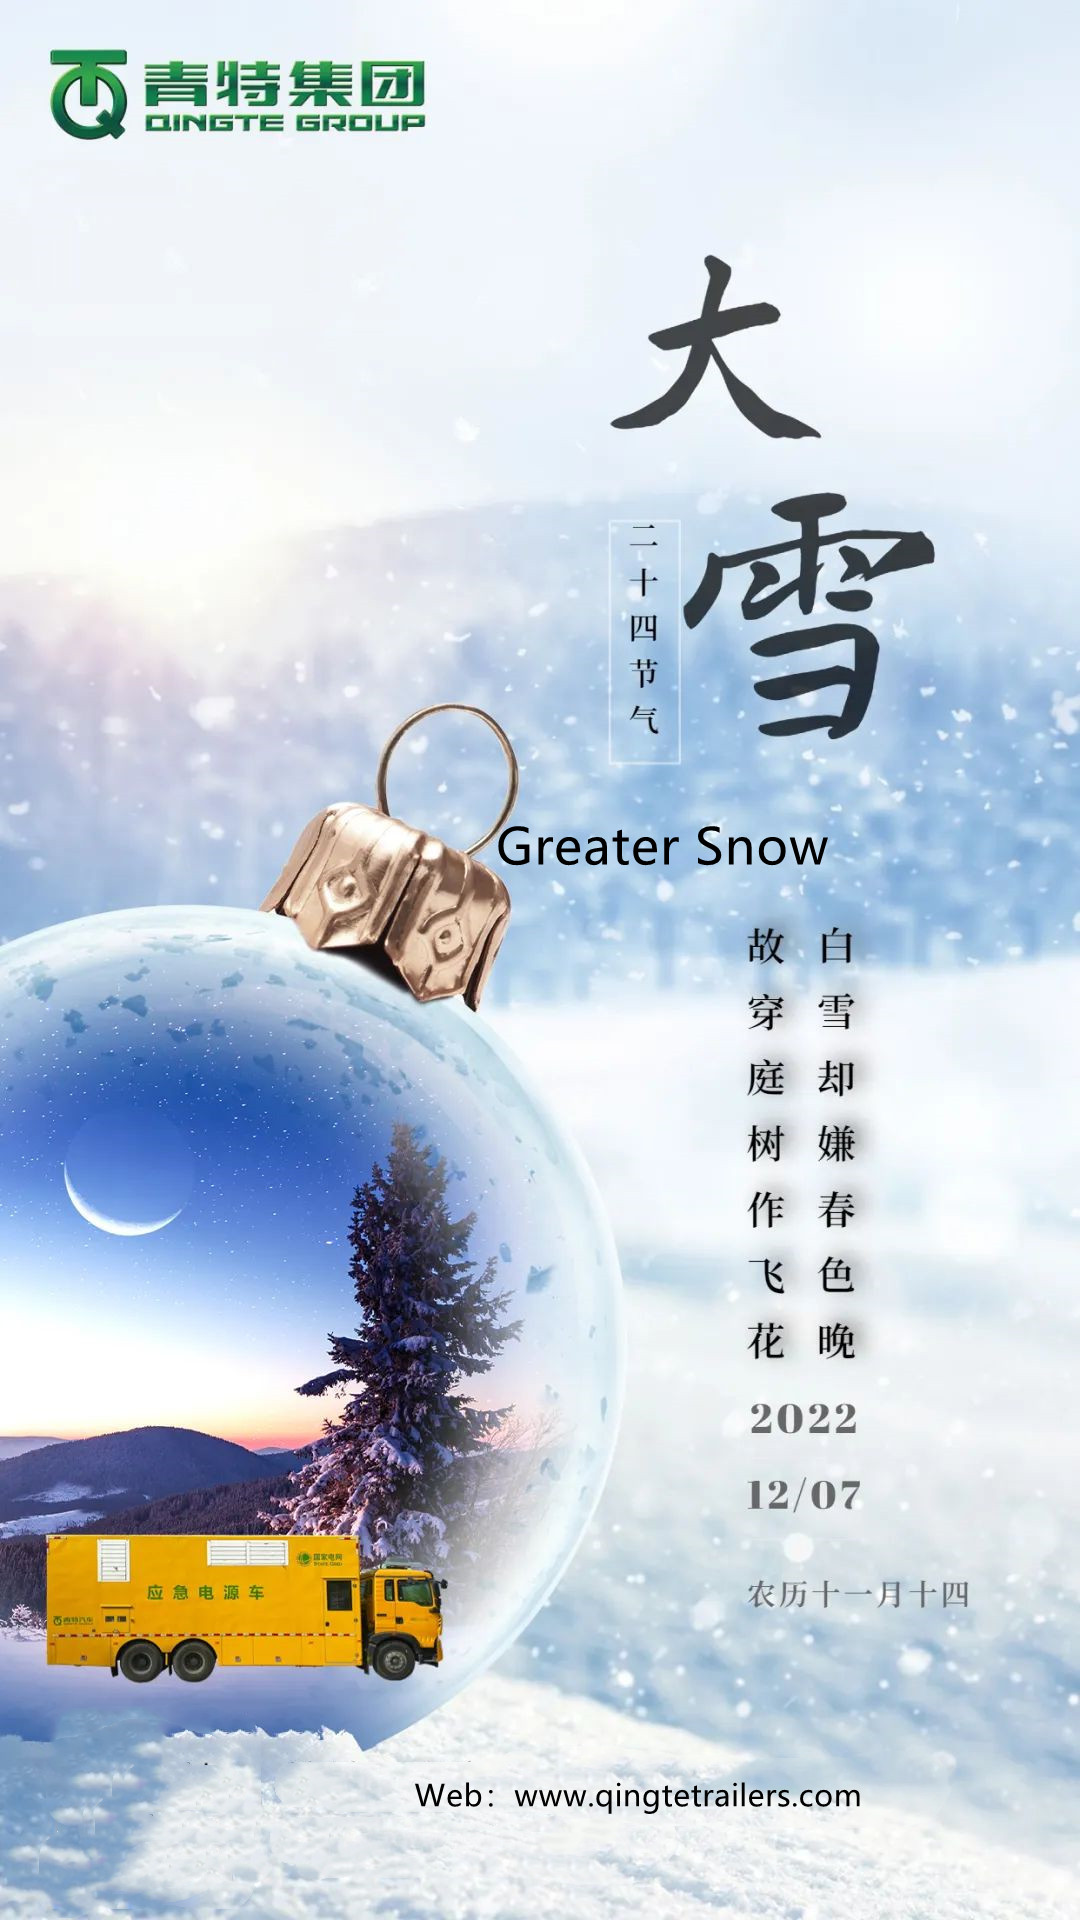 Qingte Send Warmth On Greater Snow